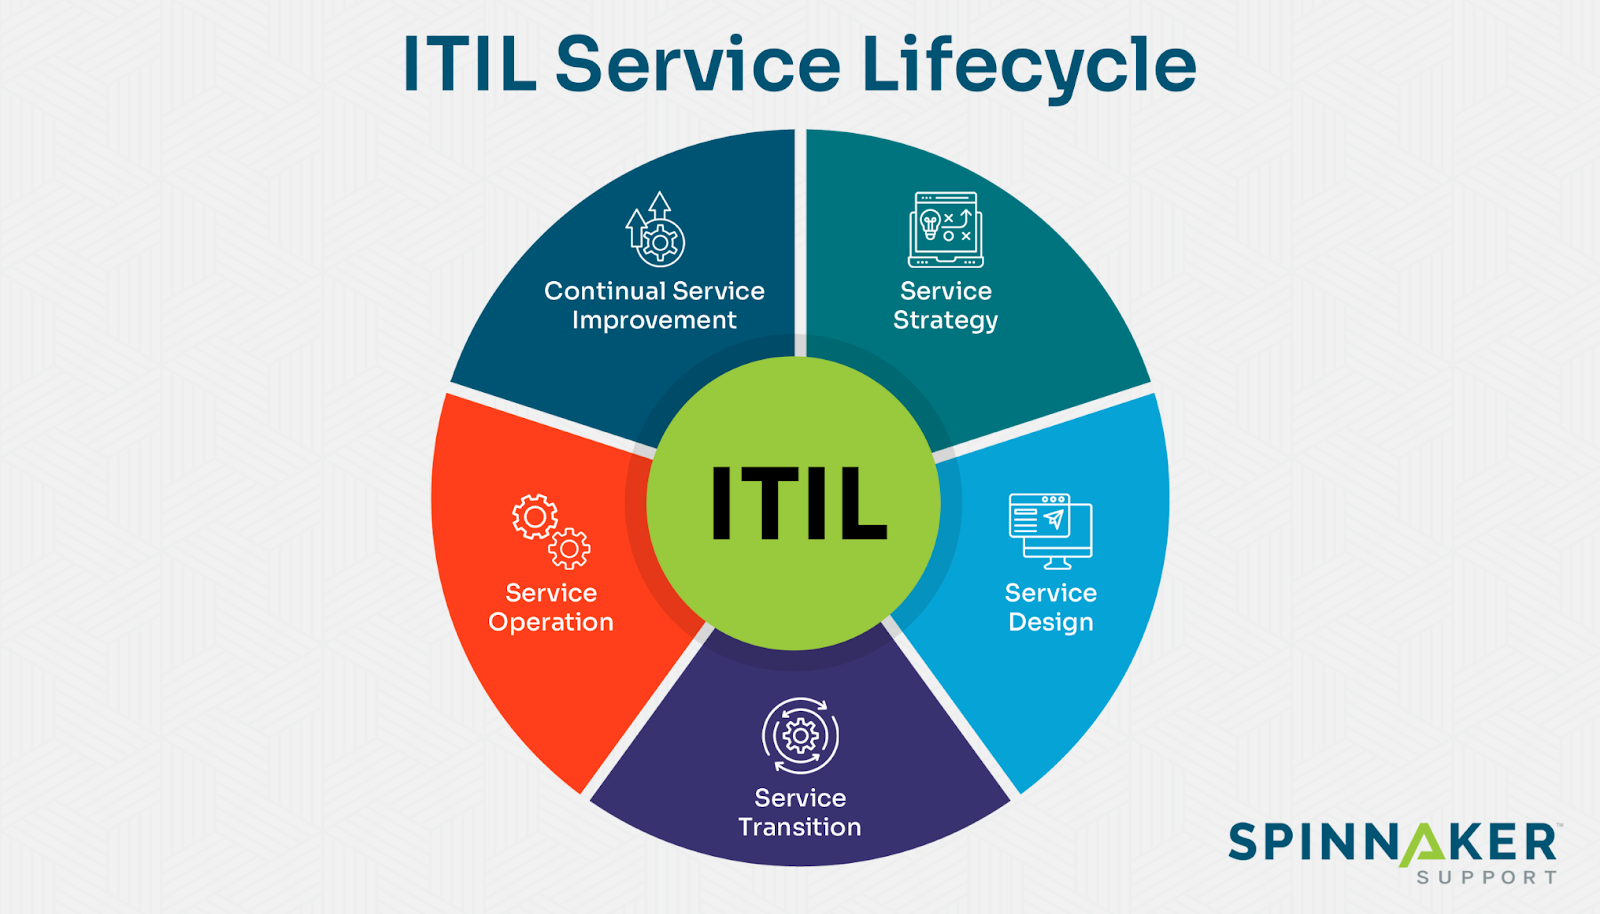 5 stages of the ITIL service lifecycle